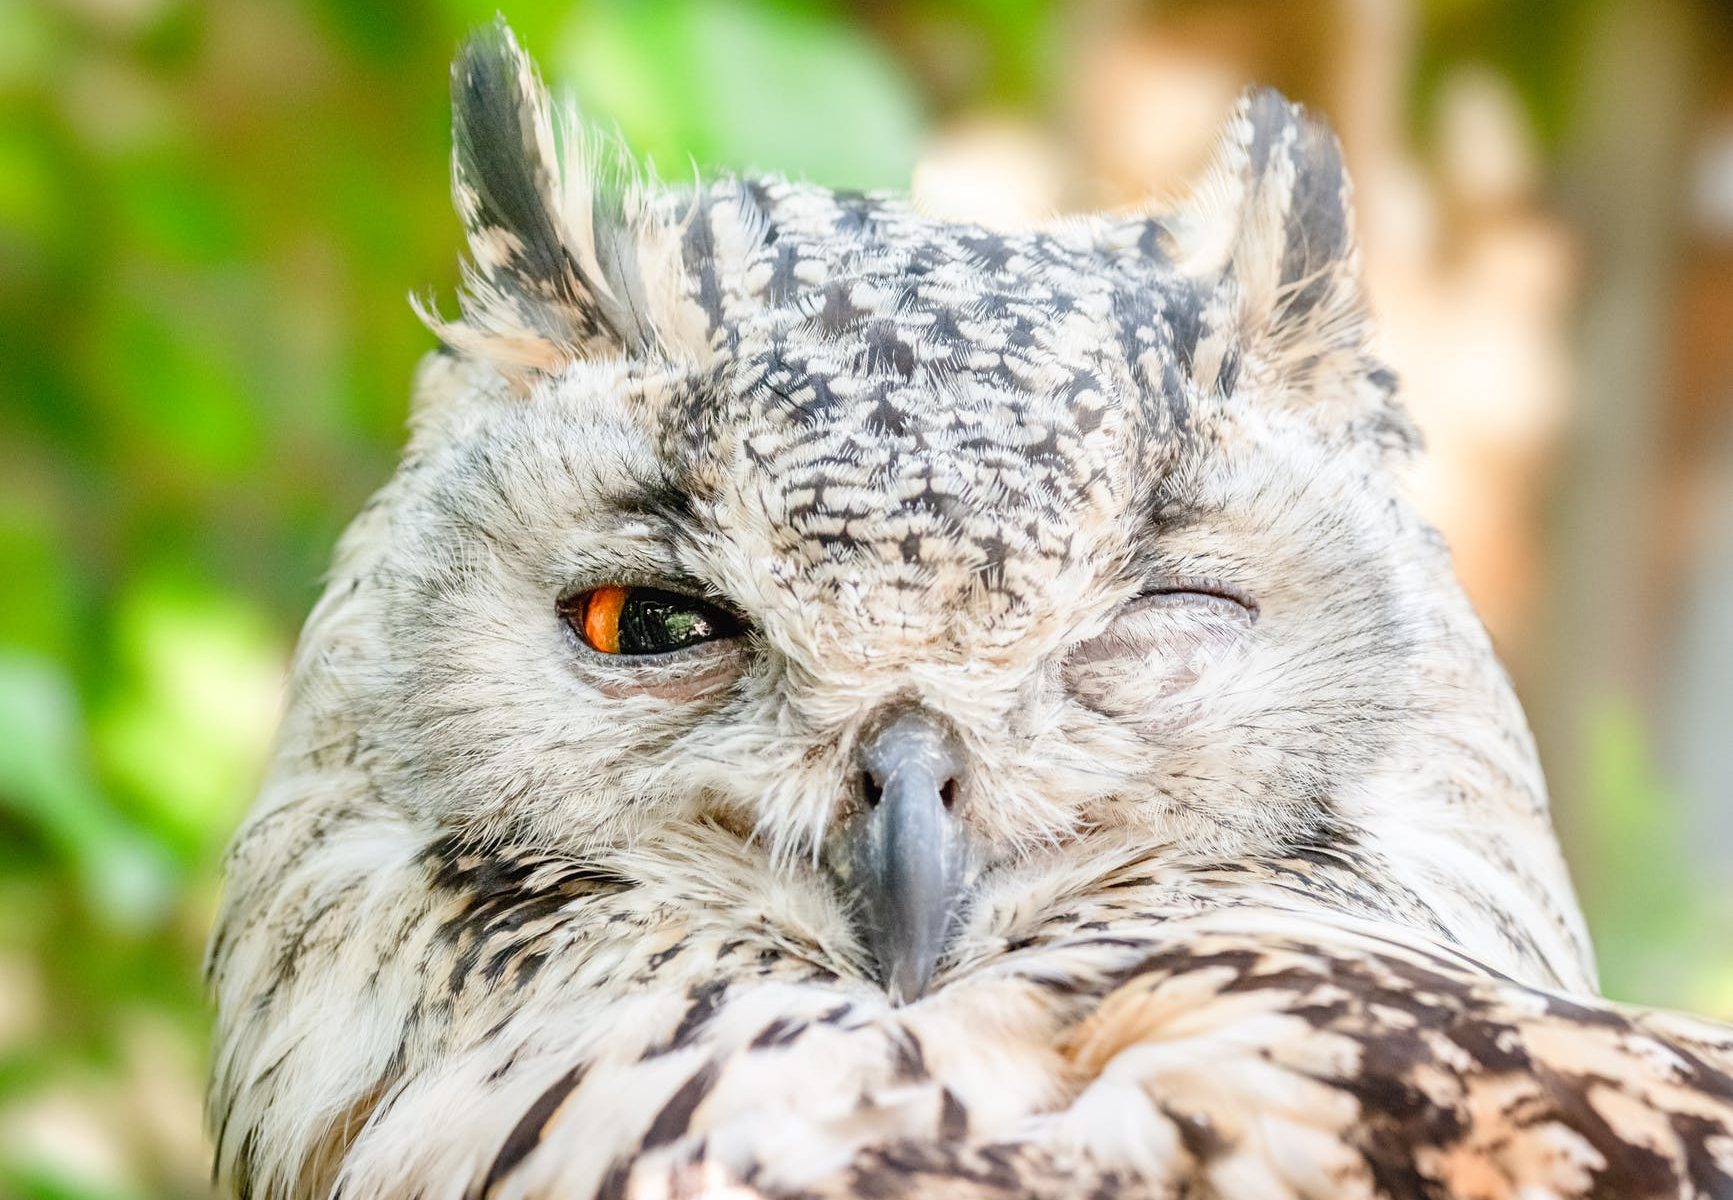 close up photo of owl with one eye open